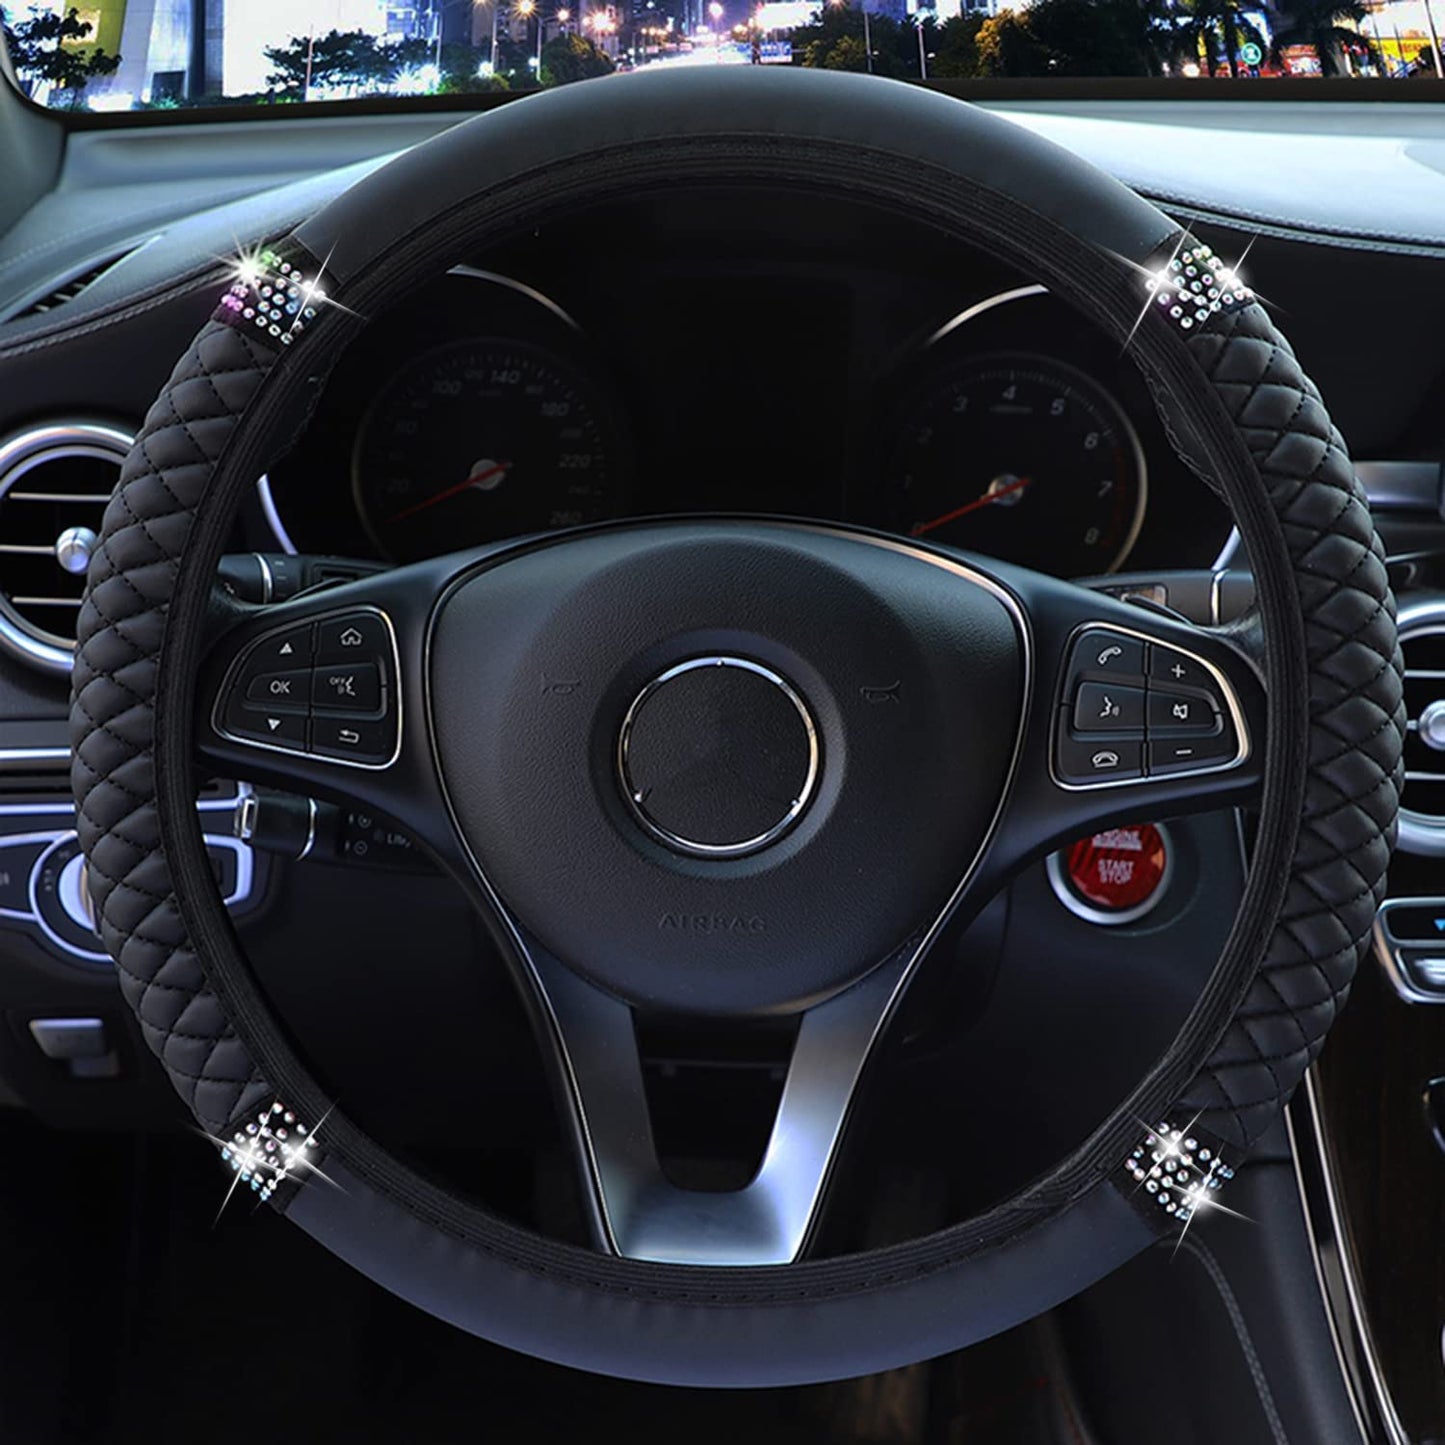 Bling Soft Leather Steering Wheel Cover, 15 Inch Colorful Bling Crystal Rhinestones Auto Elastic Steering Wheel Protector for Women Girls, Car Accessories for Most Cars (Black)